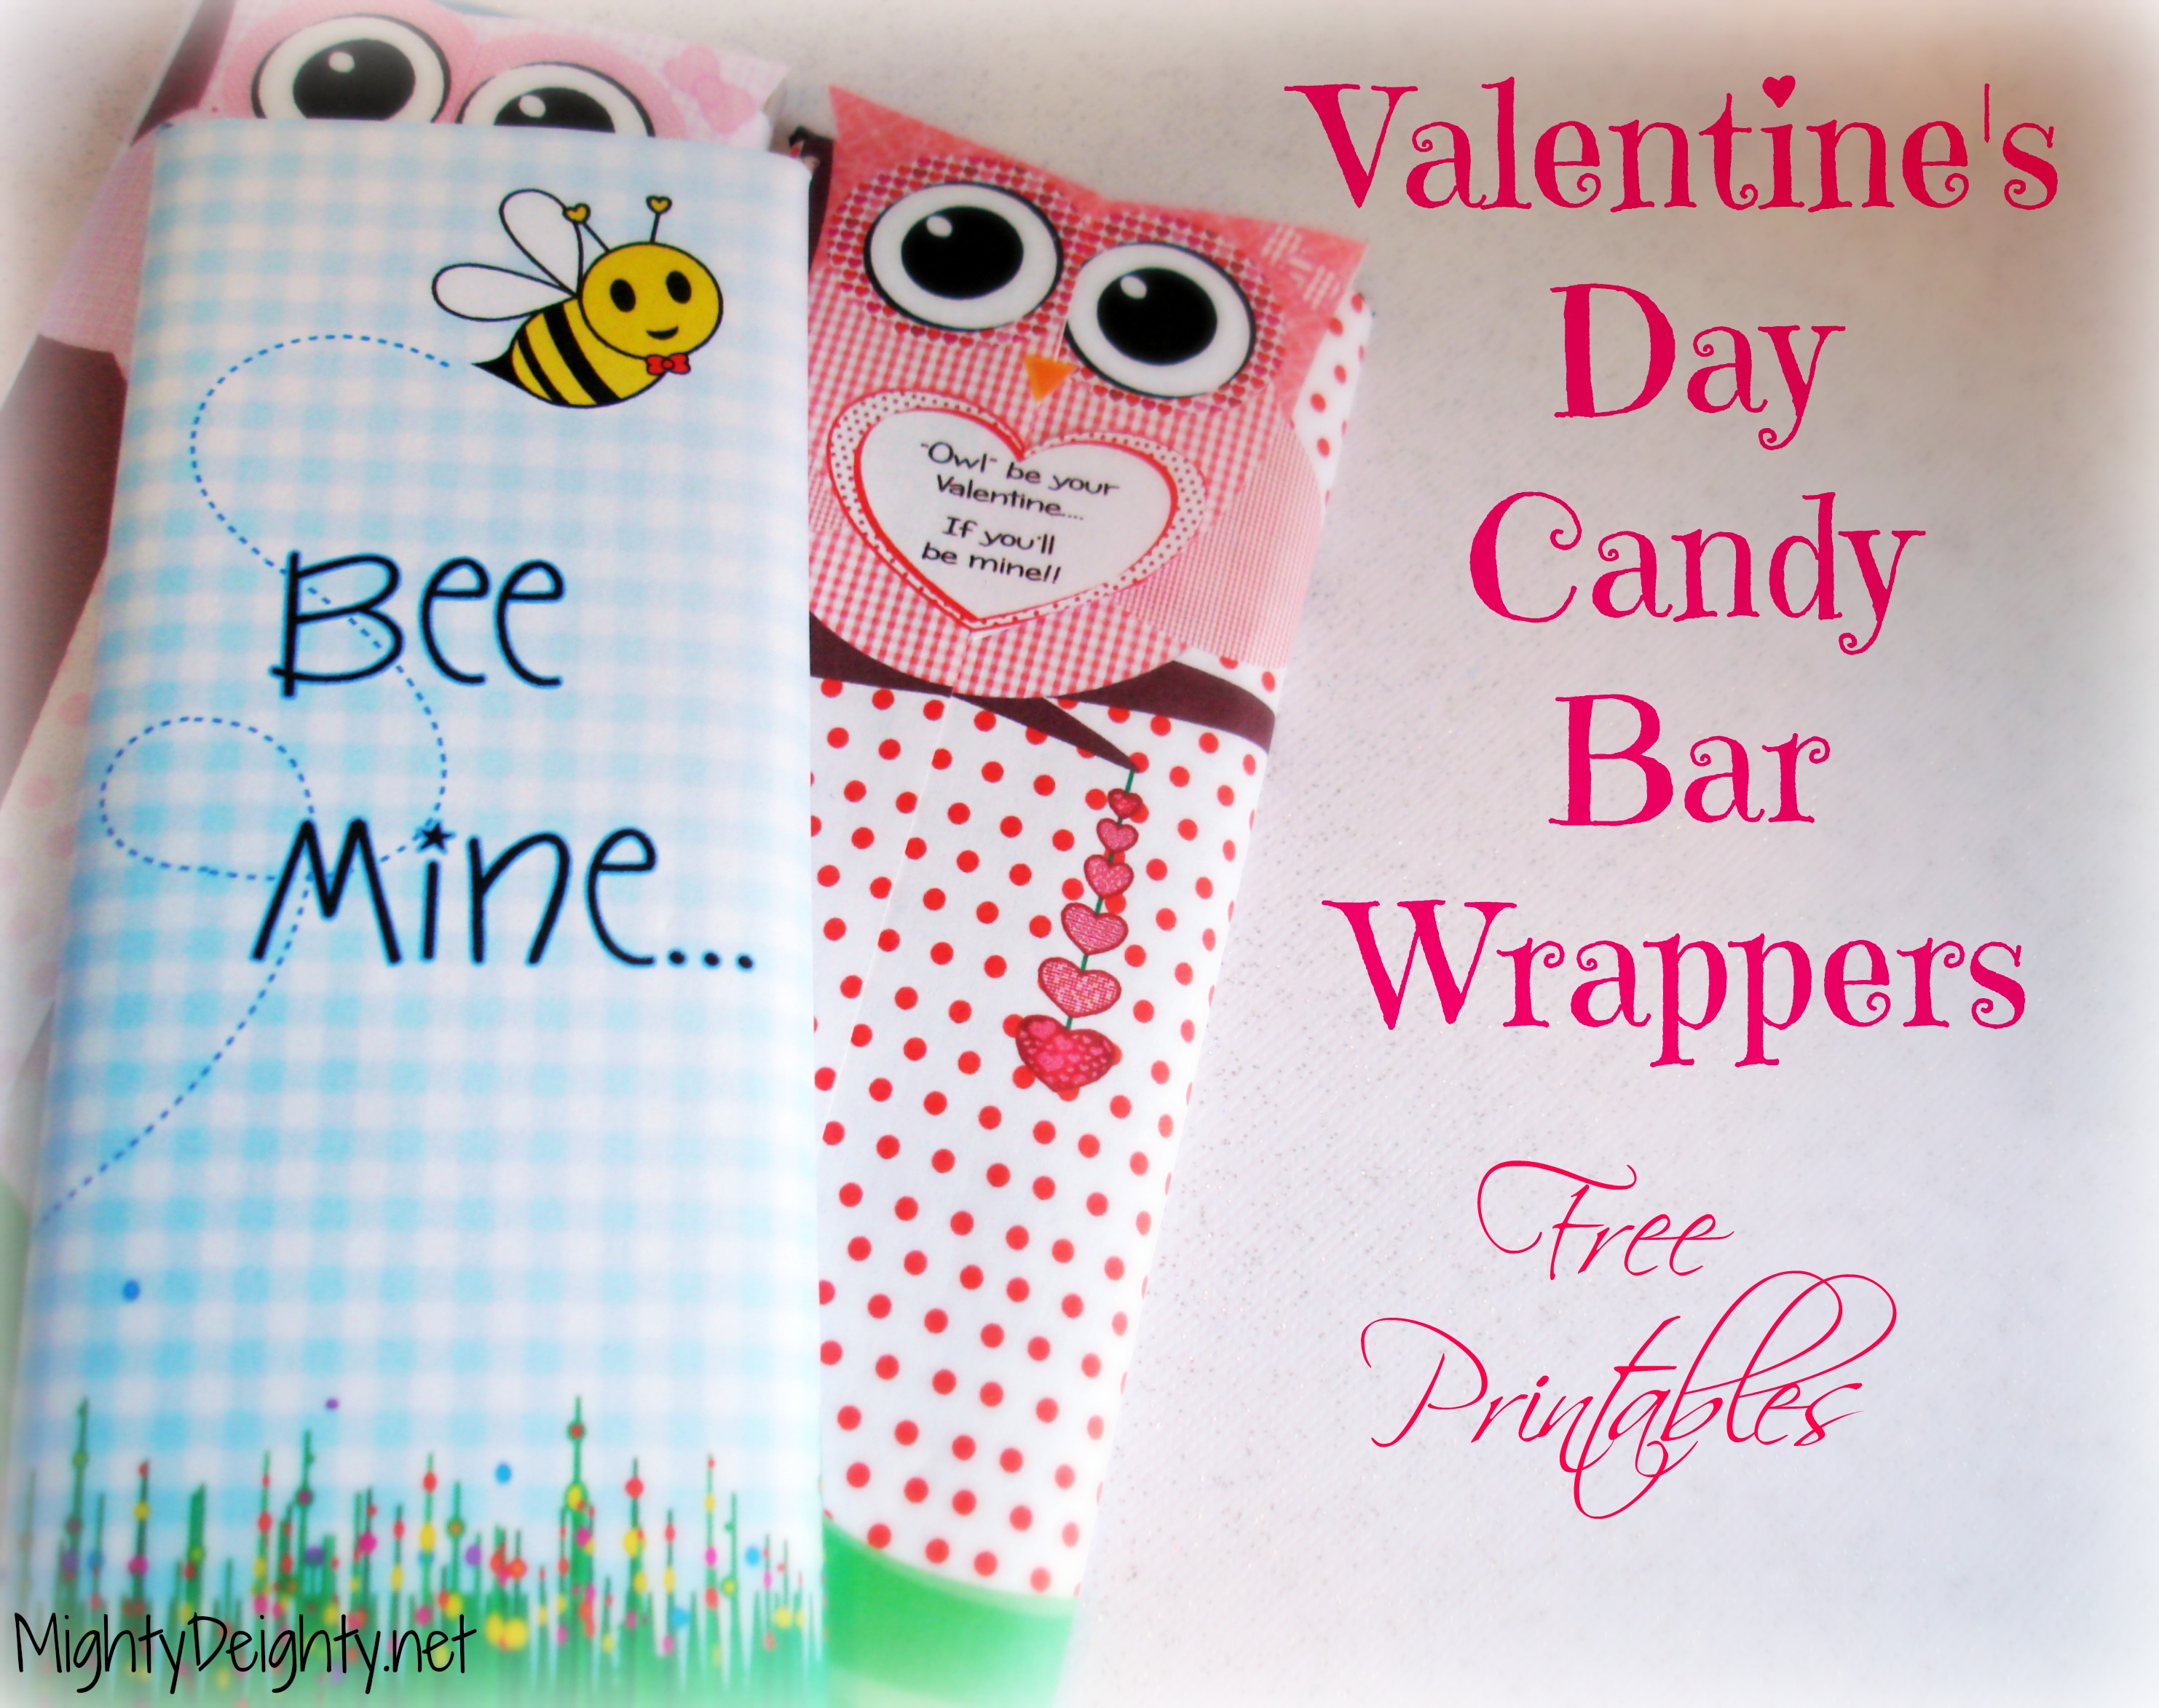 6 Best Images of Free Printable Candy Templates Printable Candy